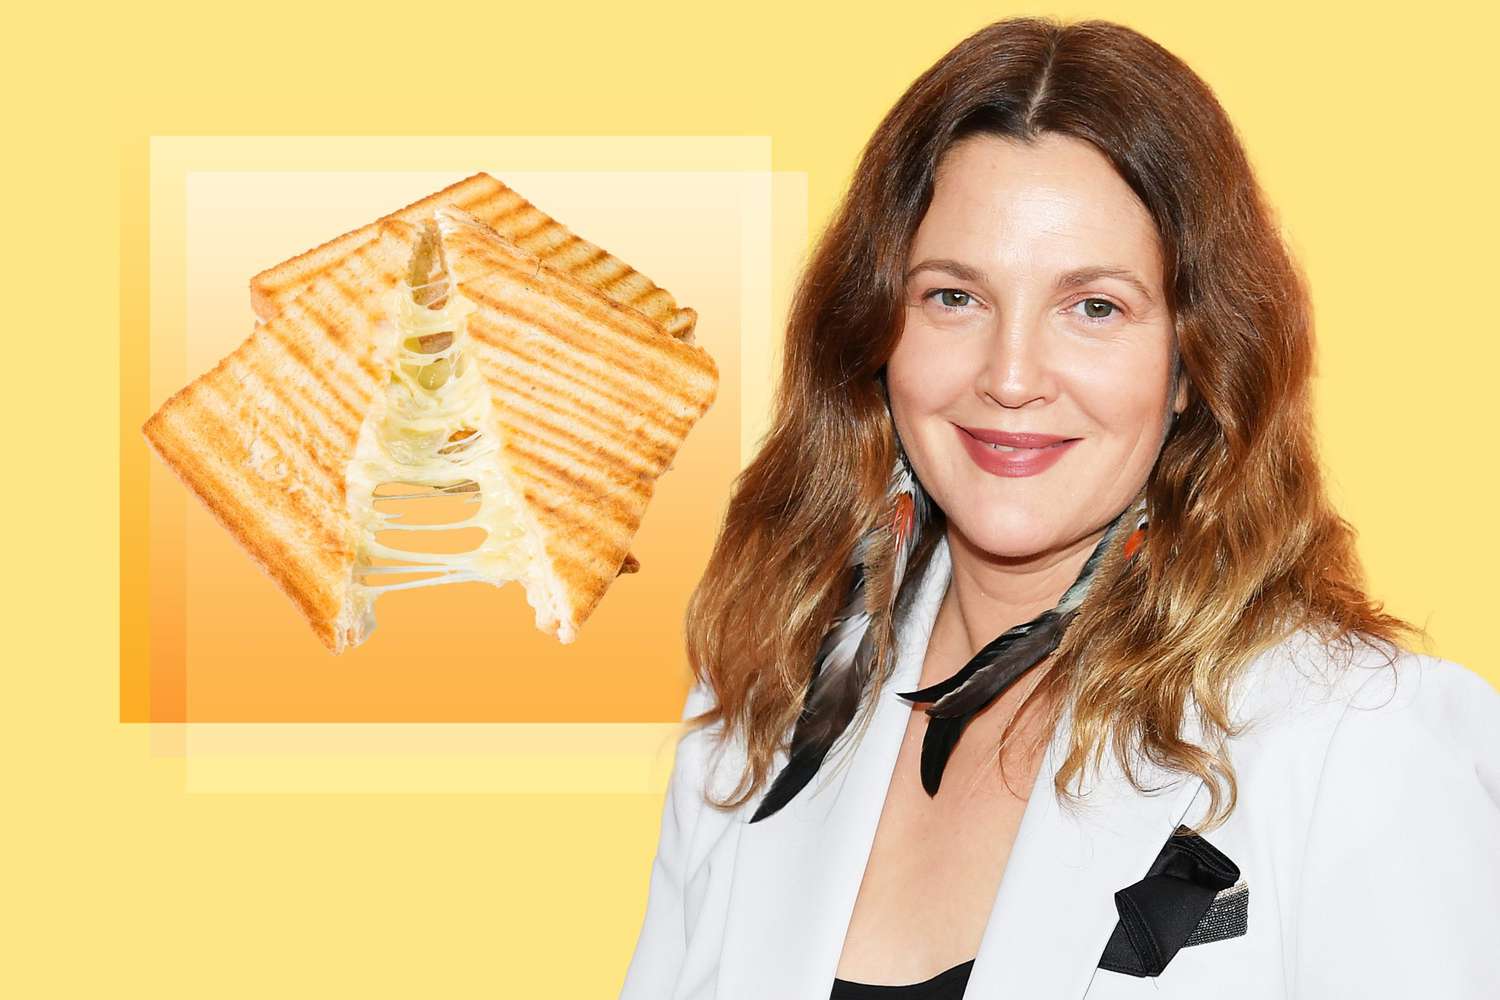 Drew-Barrymore-Says-This-Veggie-Is-the-Secret-to-the-Perfect-Grilled-Cheese-GettyImages-1187250963-AdobeStock_196243096